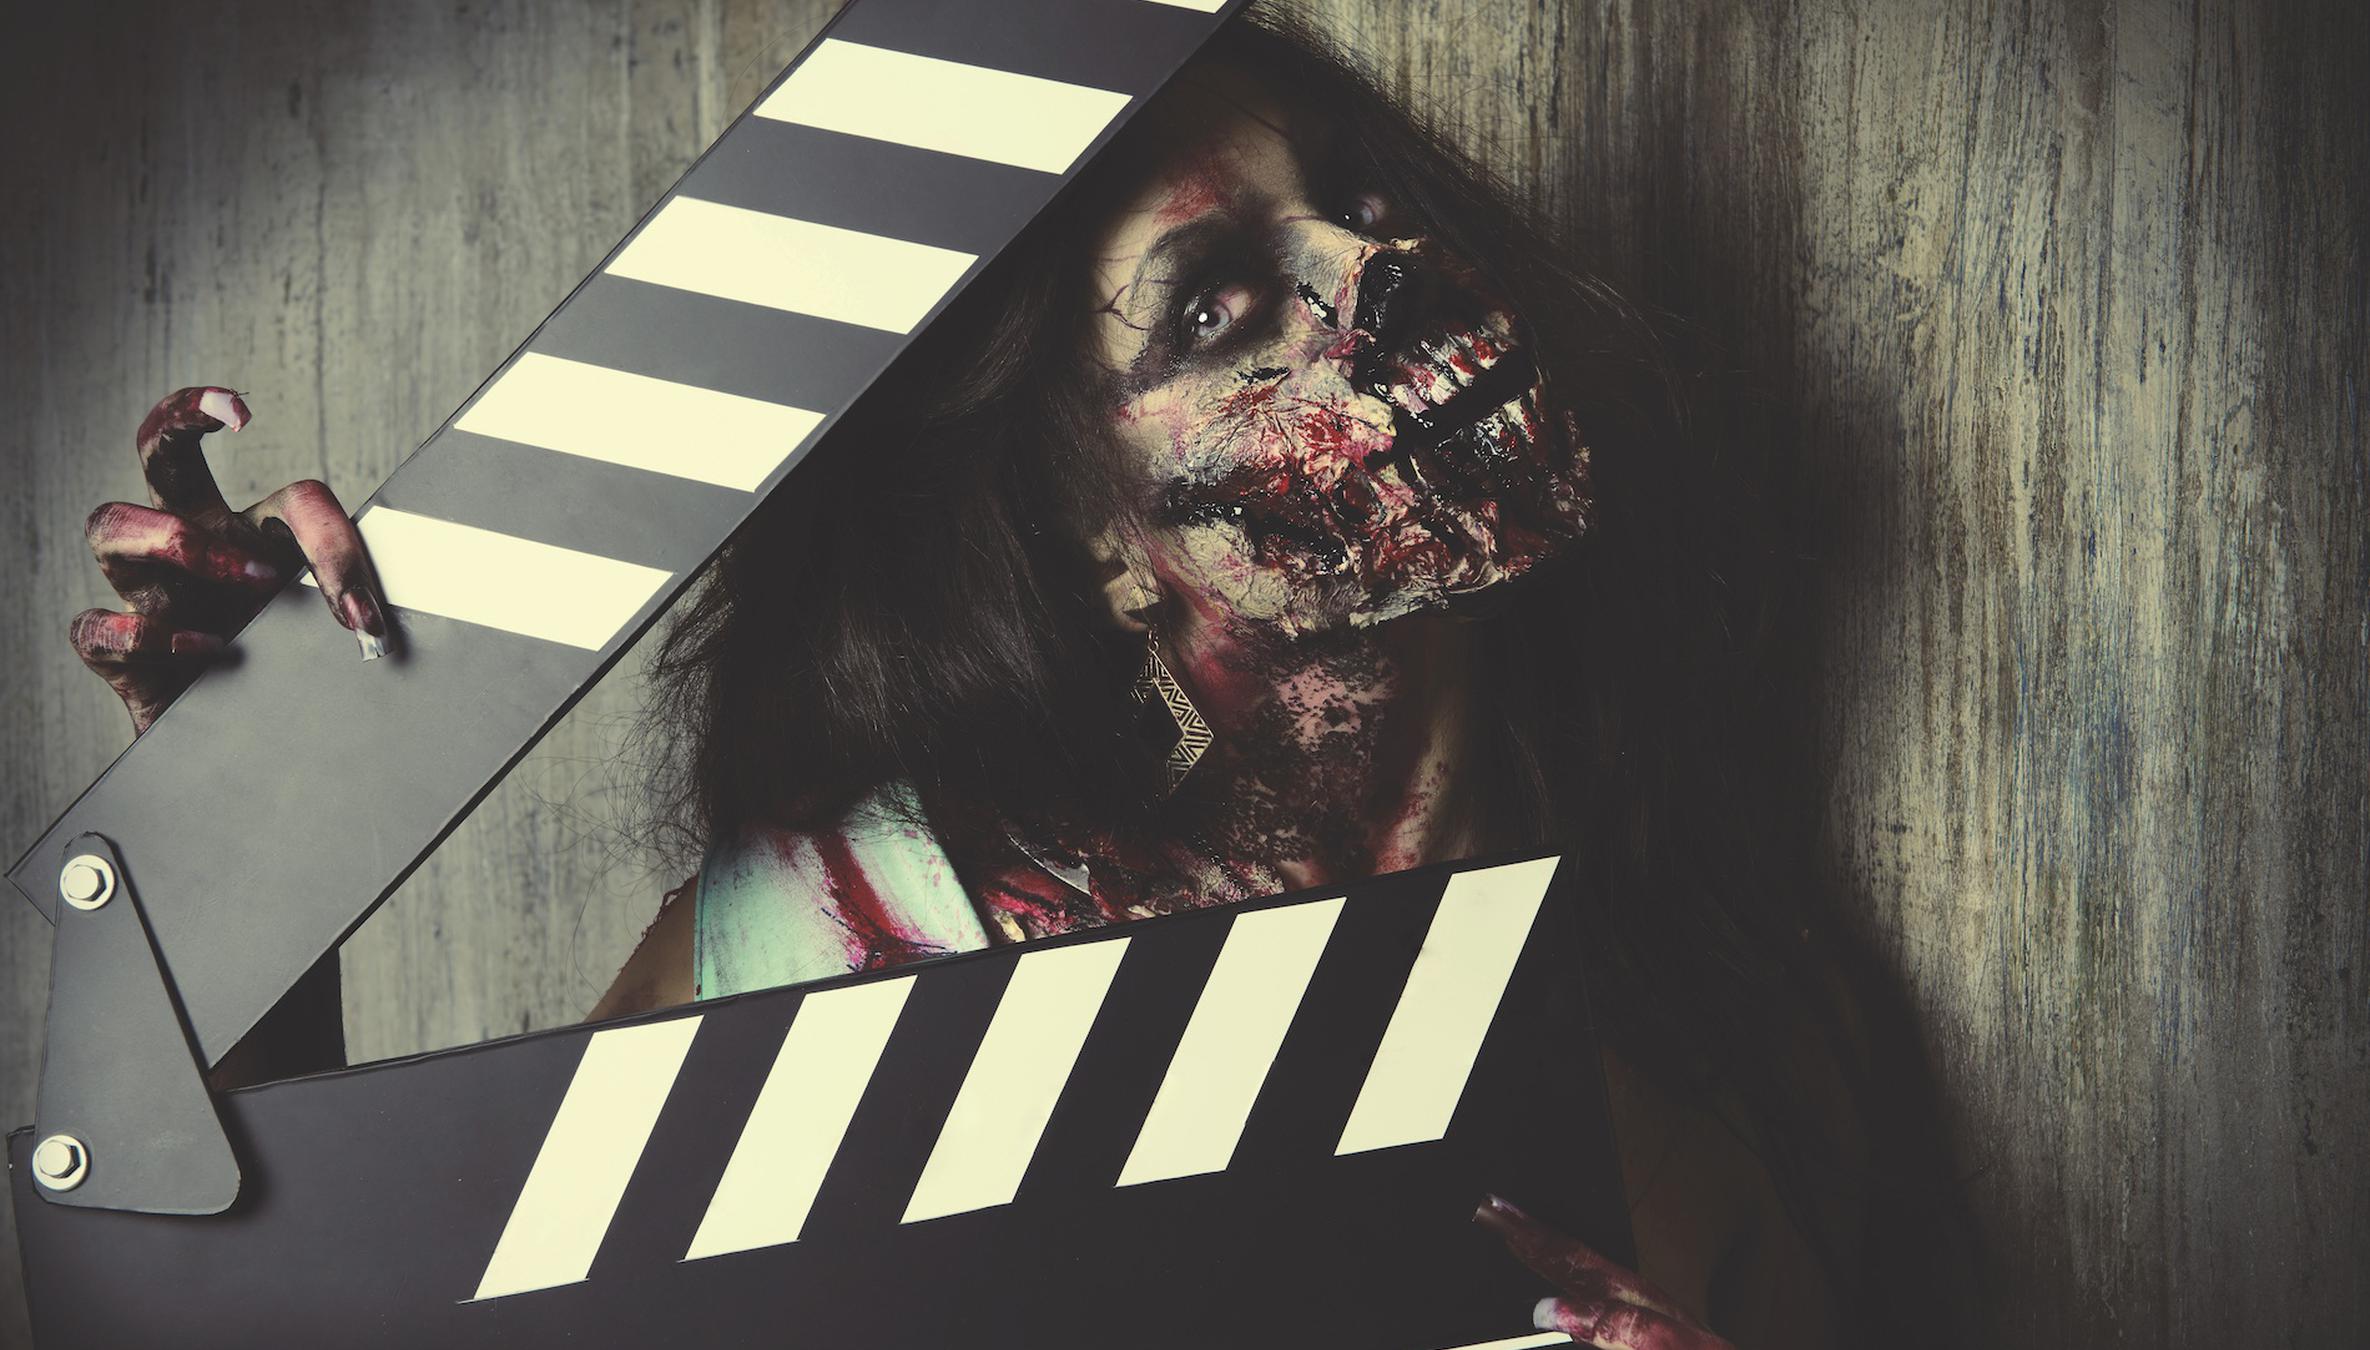 Open call for Louisiana horror filmmakers: Submit a short for